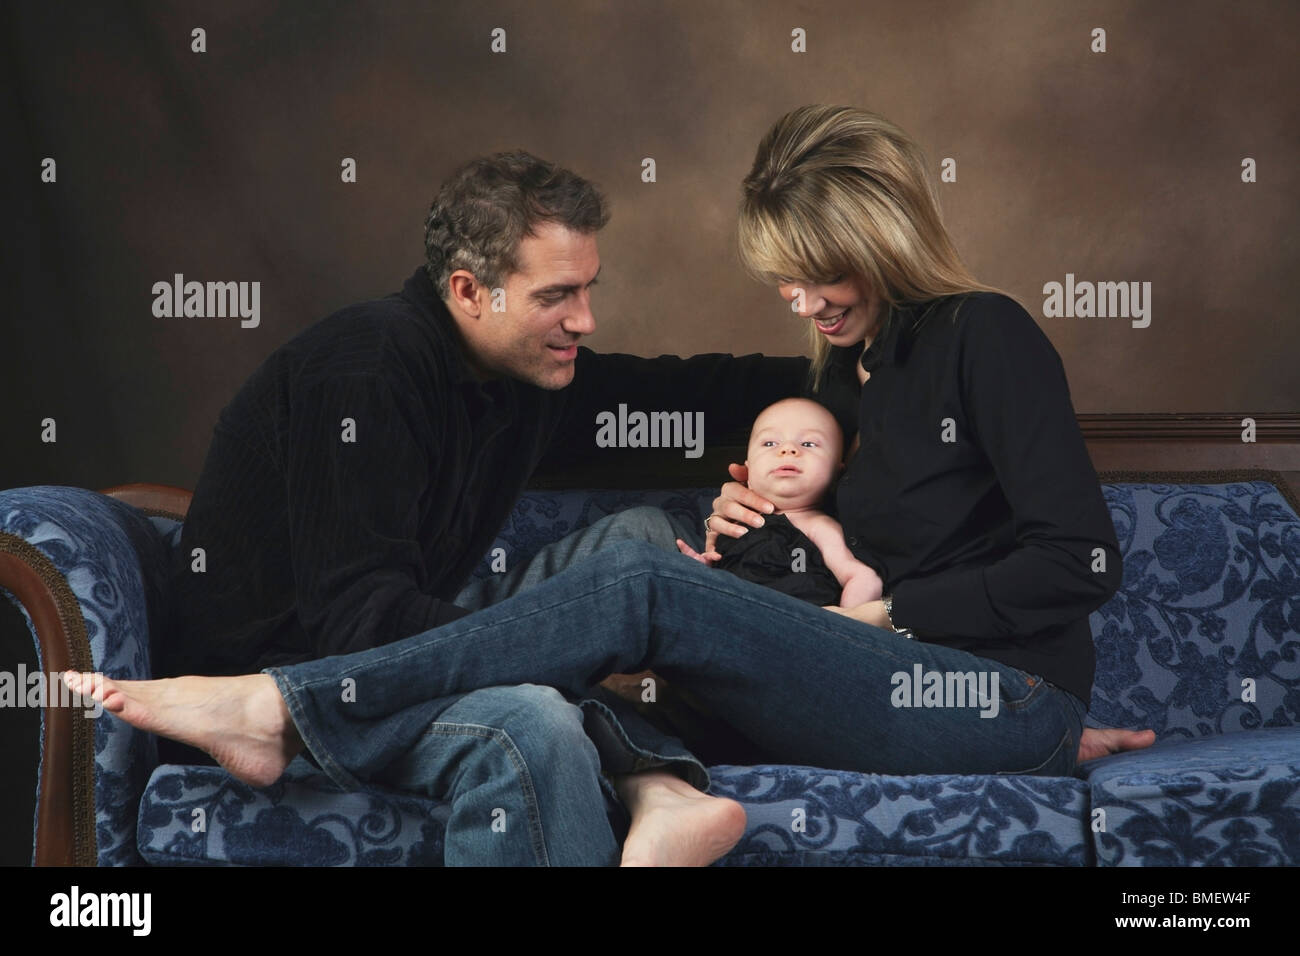 A Family Sitting On A Couch Holding Their Baby Stock Photo